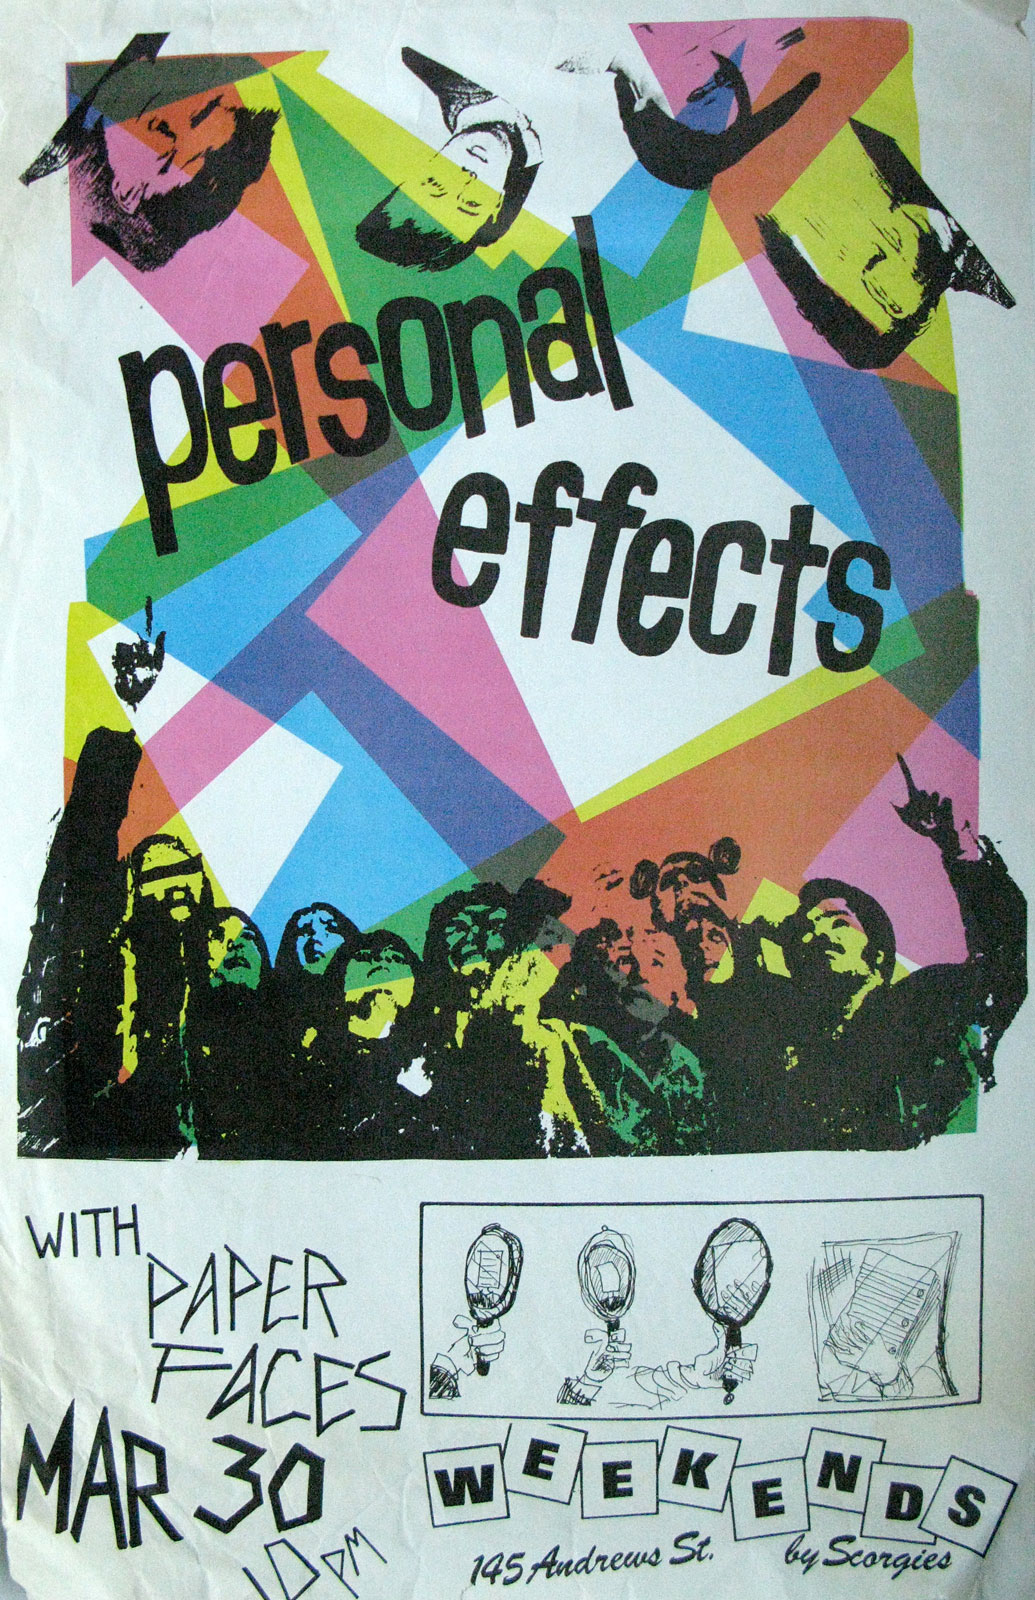 Poster for Personal Effects with Paper Faces at Scorgie's in Rochester, New York on 03.30.1984. Chris Schepp designed this poster and printed it at Midtown Printing.